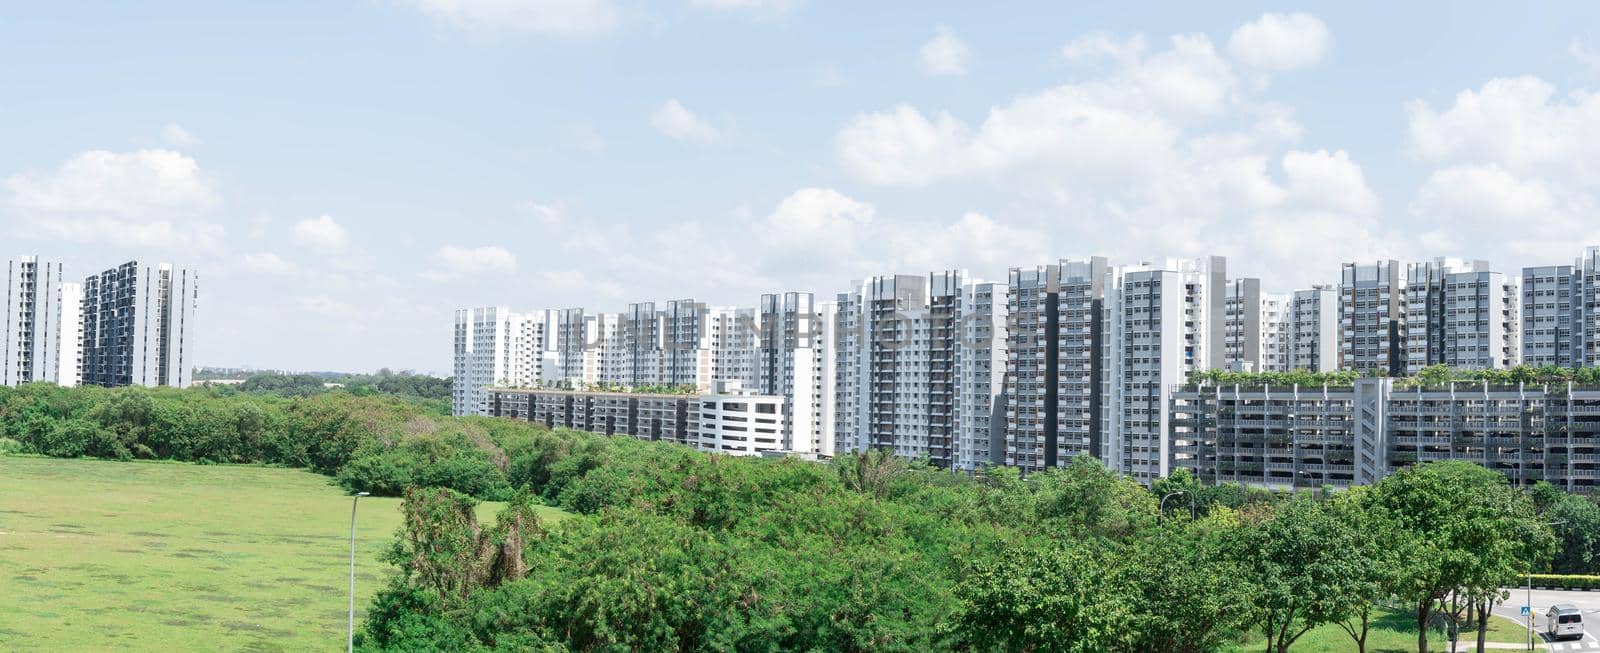 Panorama shot of HDB condominiums in Singapore. Green forest park and blue sky with clouds